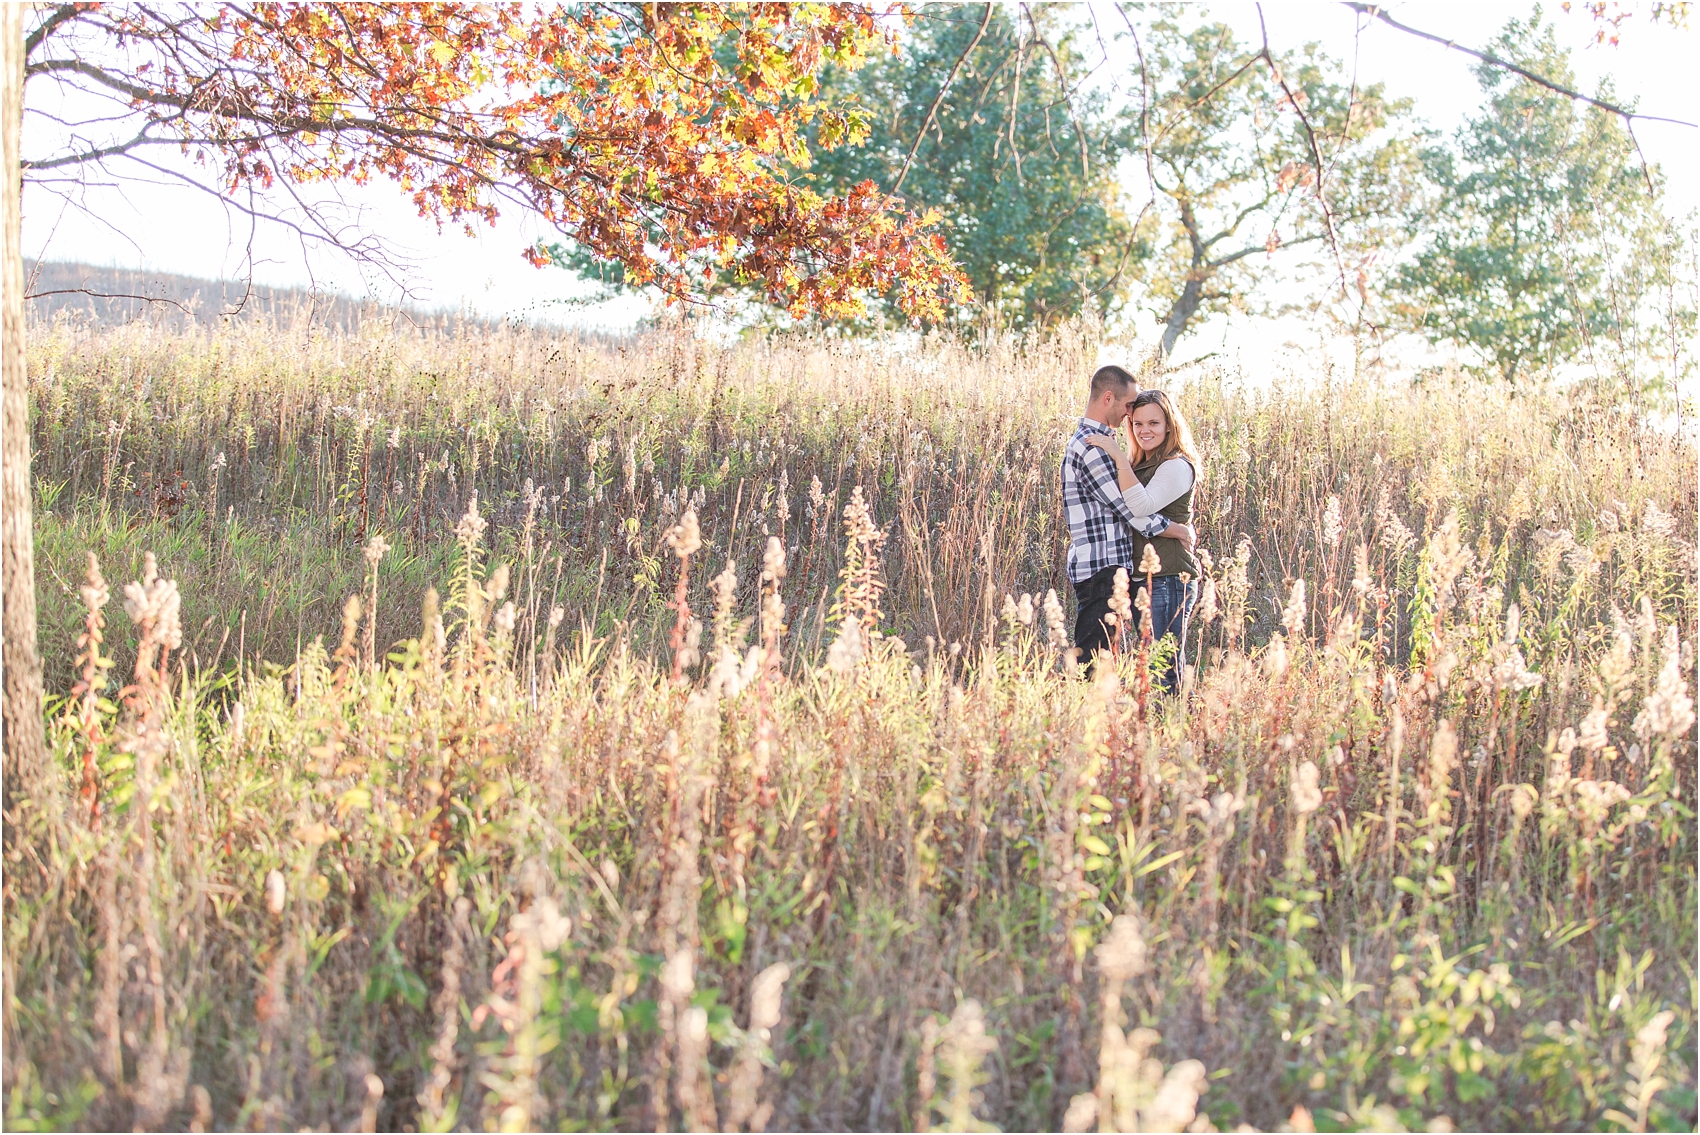 romantic-fall-engagement-photos-at-indian-springs-metropark-in-clarkston-mi-by-courtney-carolyn-photography_0006.jpg